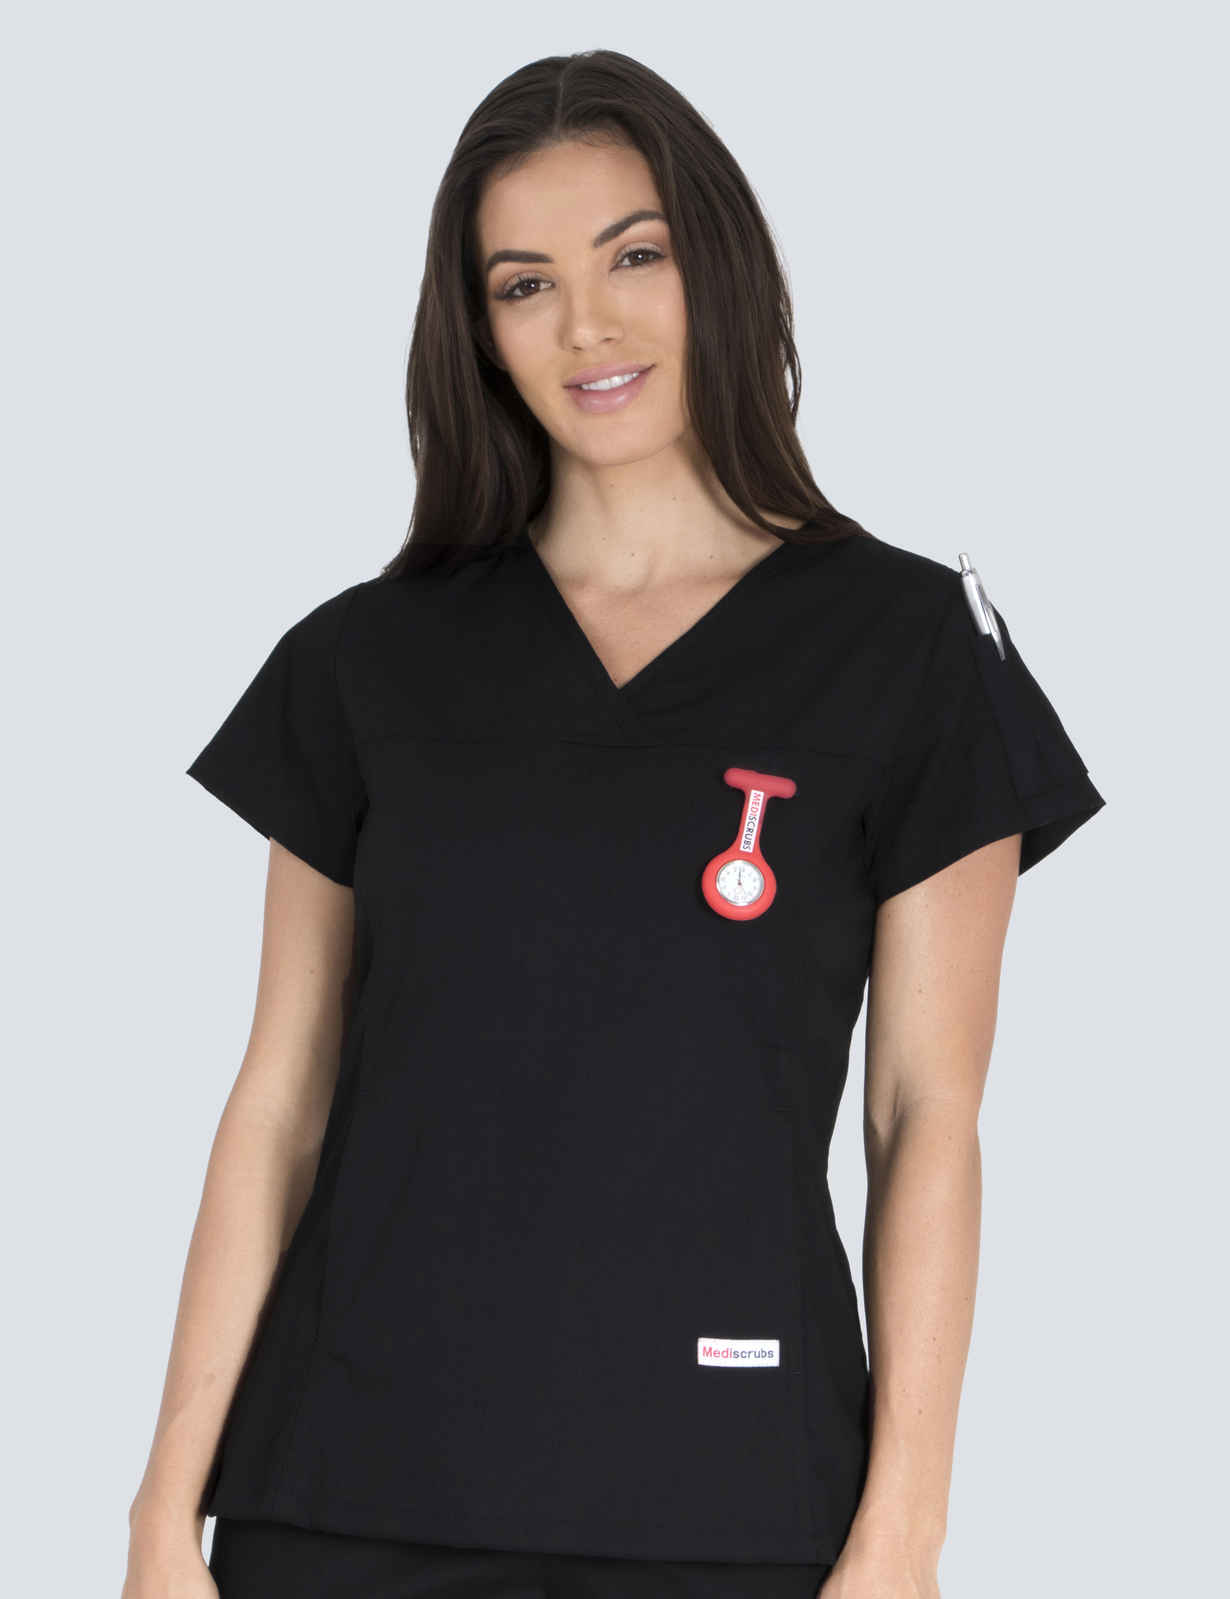 North Shore Private Hospital Sonographer Uniform Top Only Bundle (Women's Fit Solid  Top in Black + Logo)